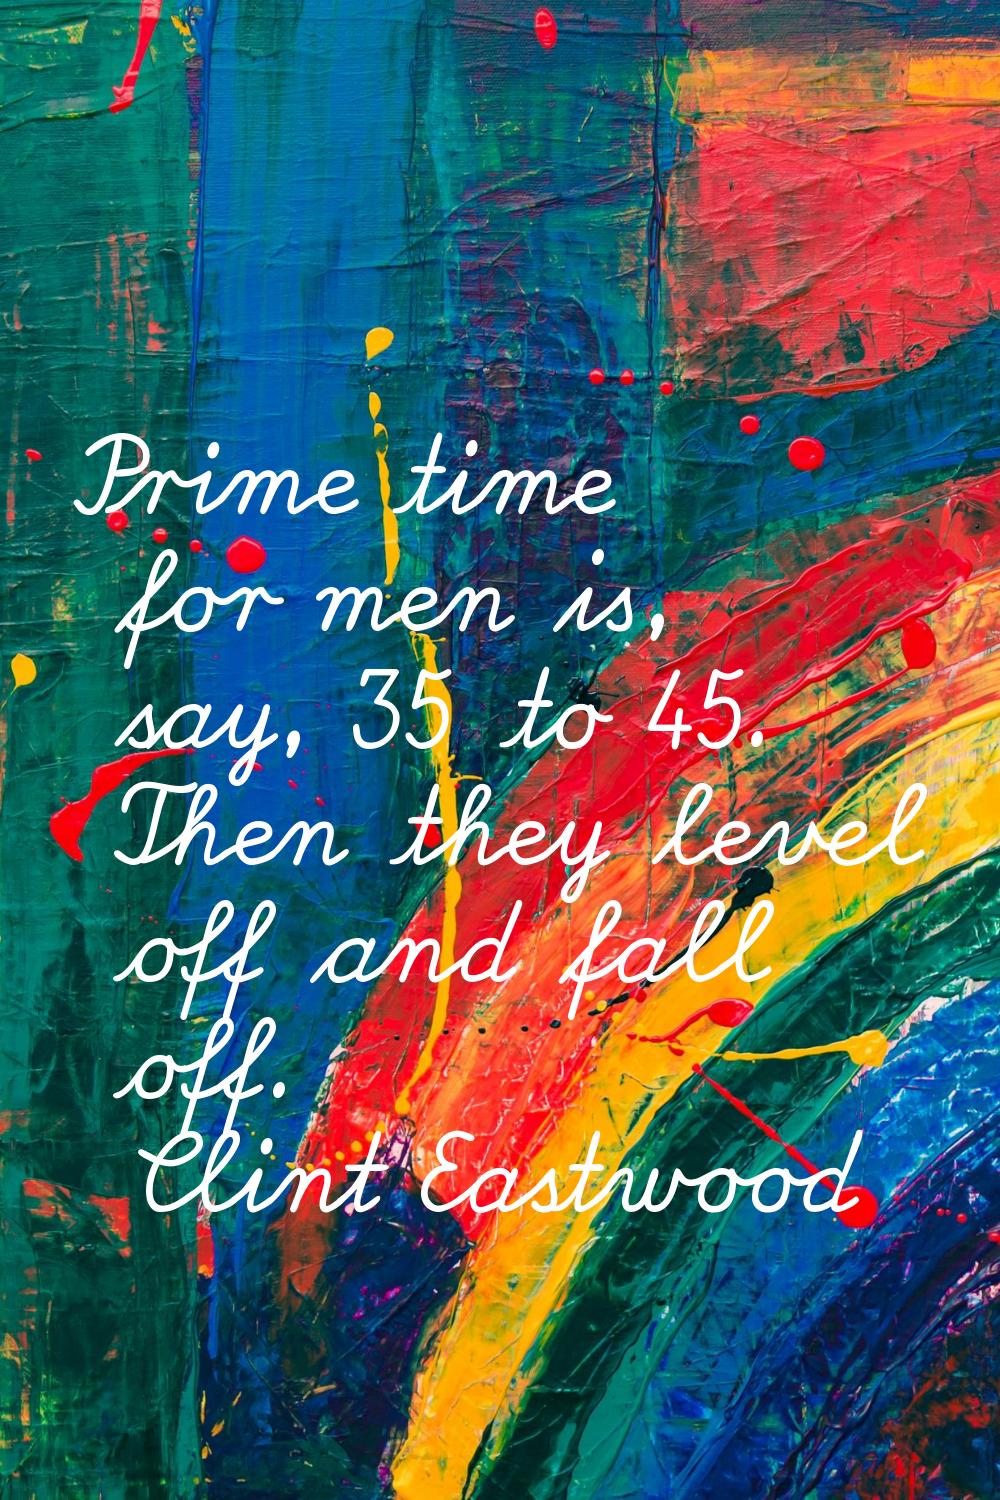 Prime time for men is, say, 35 to 45. Then they level off and fall off.